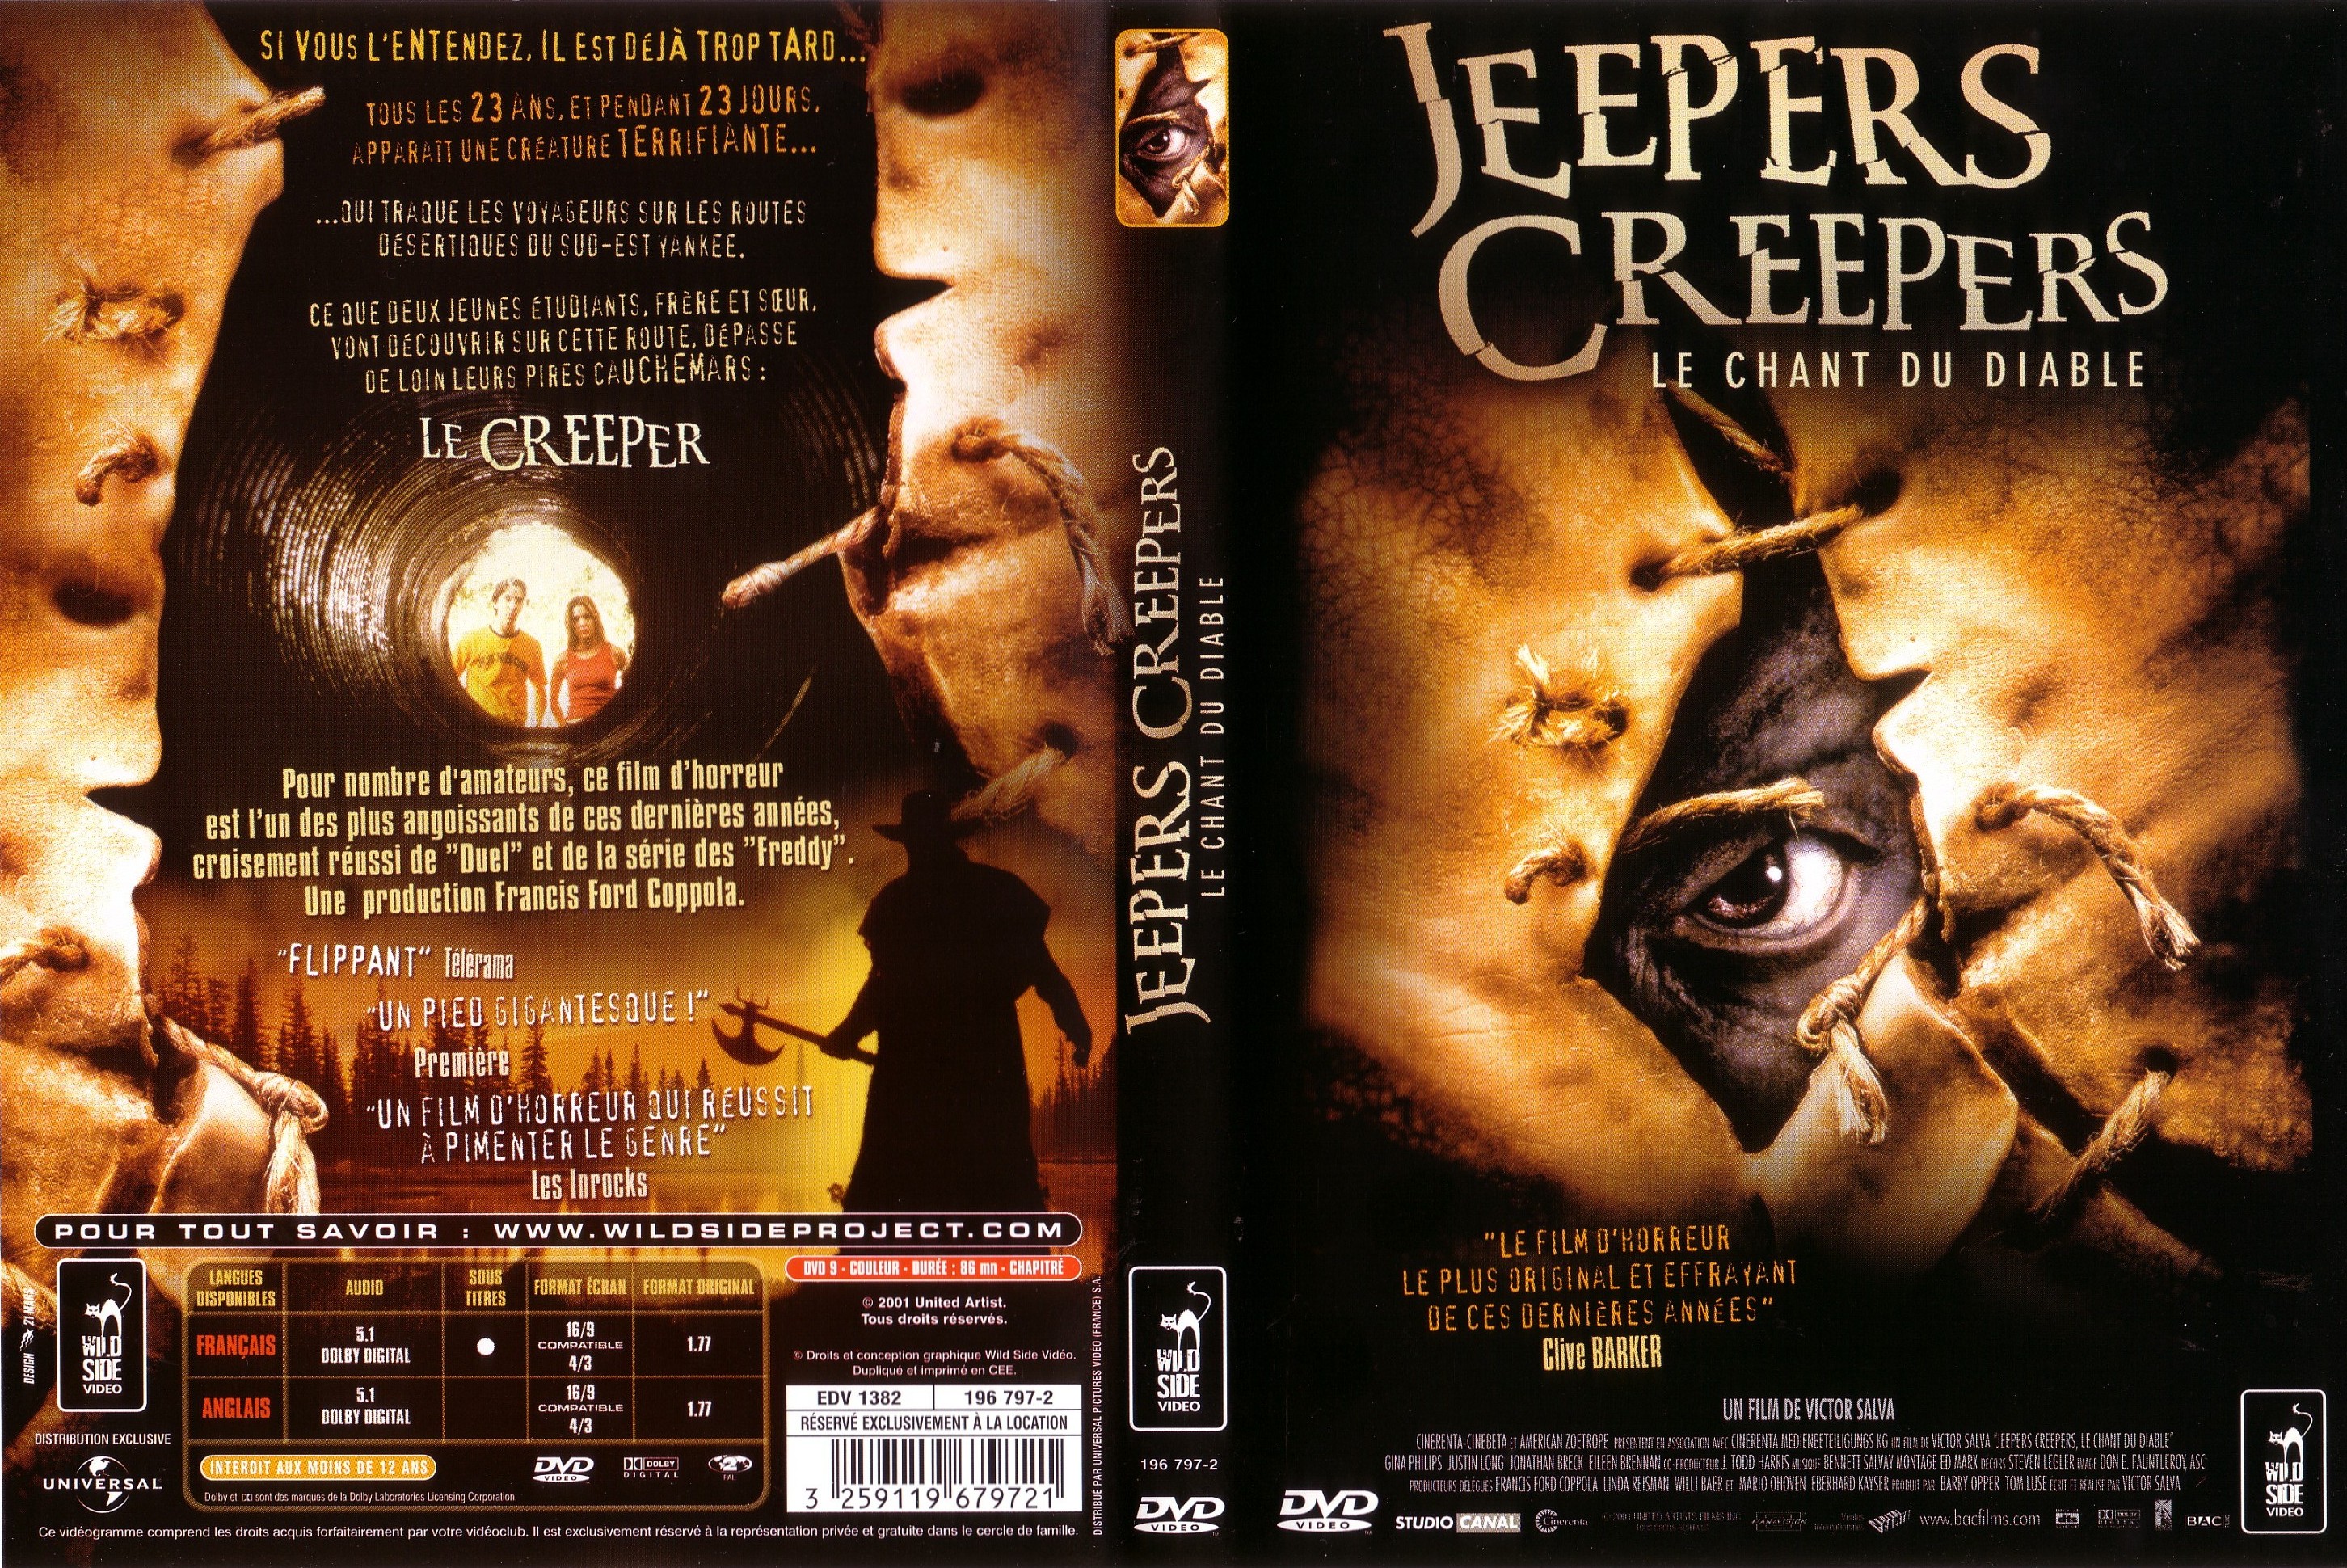 Jaquette DVD Jeepers Creepers v2